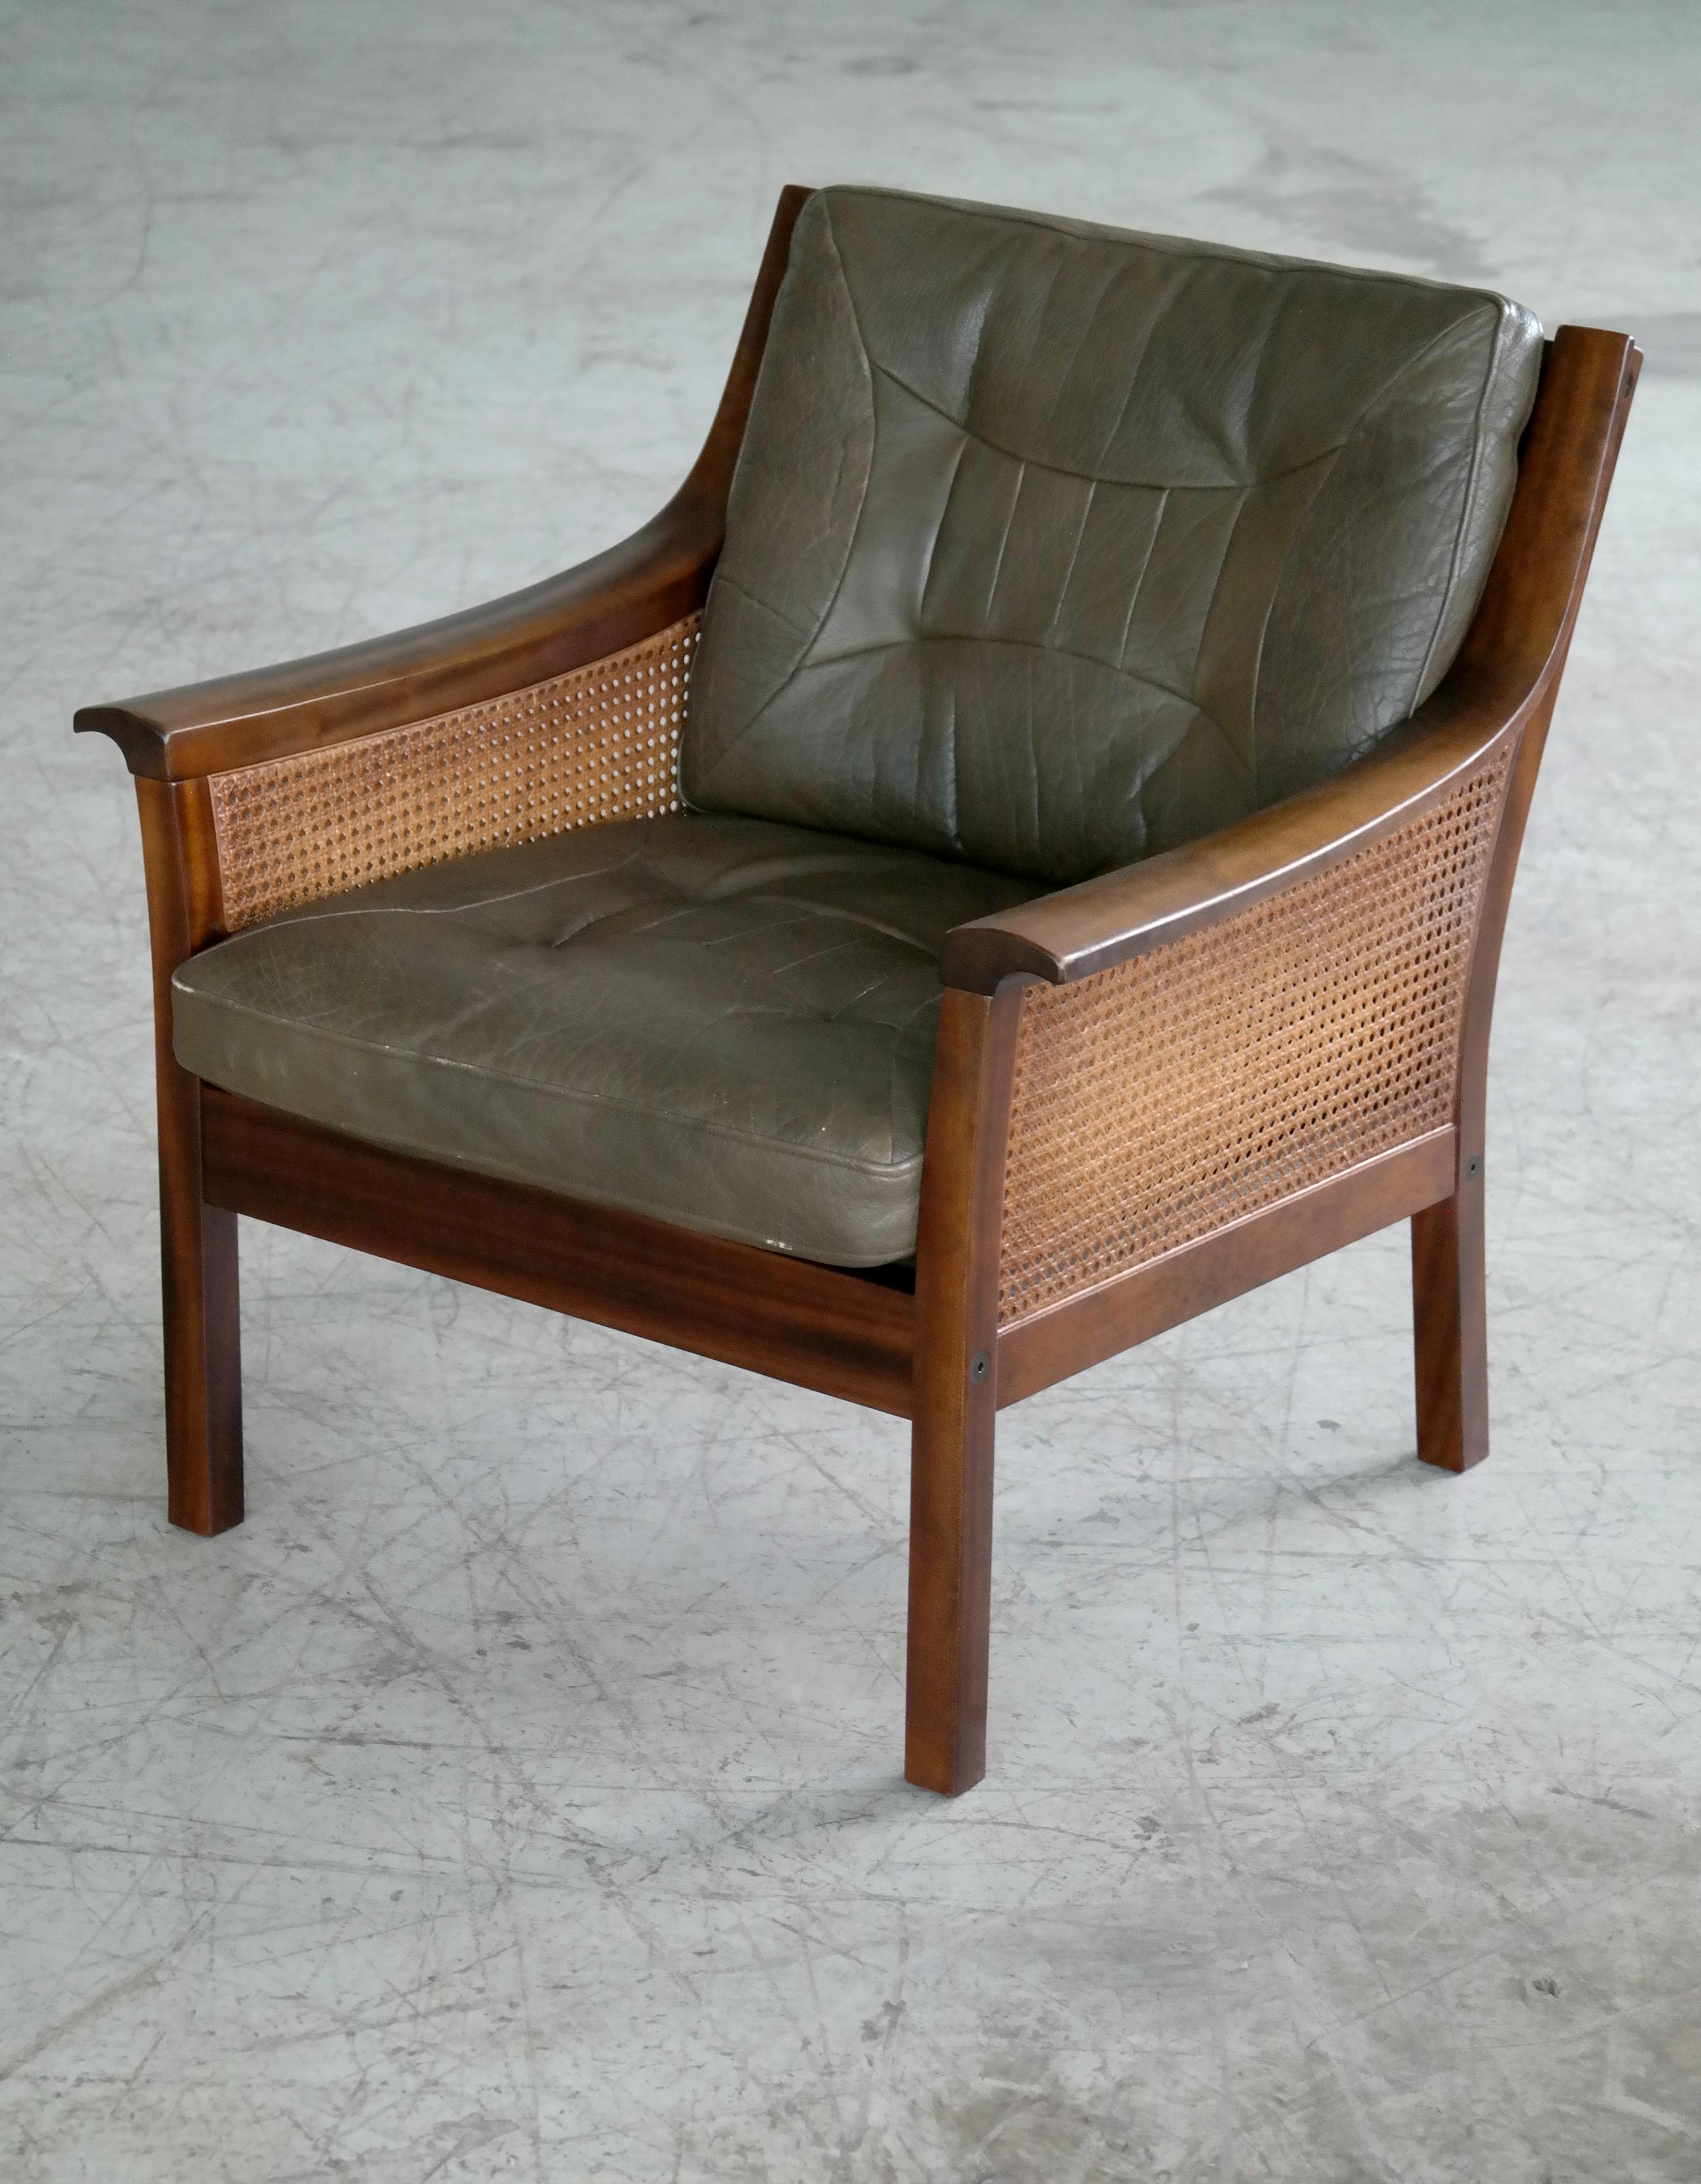 Beautiful lounge chair in stained beech with top grain olive colored leather cushions and woven double sided cane in the back and sides. Designed in the late 1960s by Torbjorn Afdal and produced by Bruksbo of Norway sometime in the 1970s. Both cane,